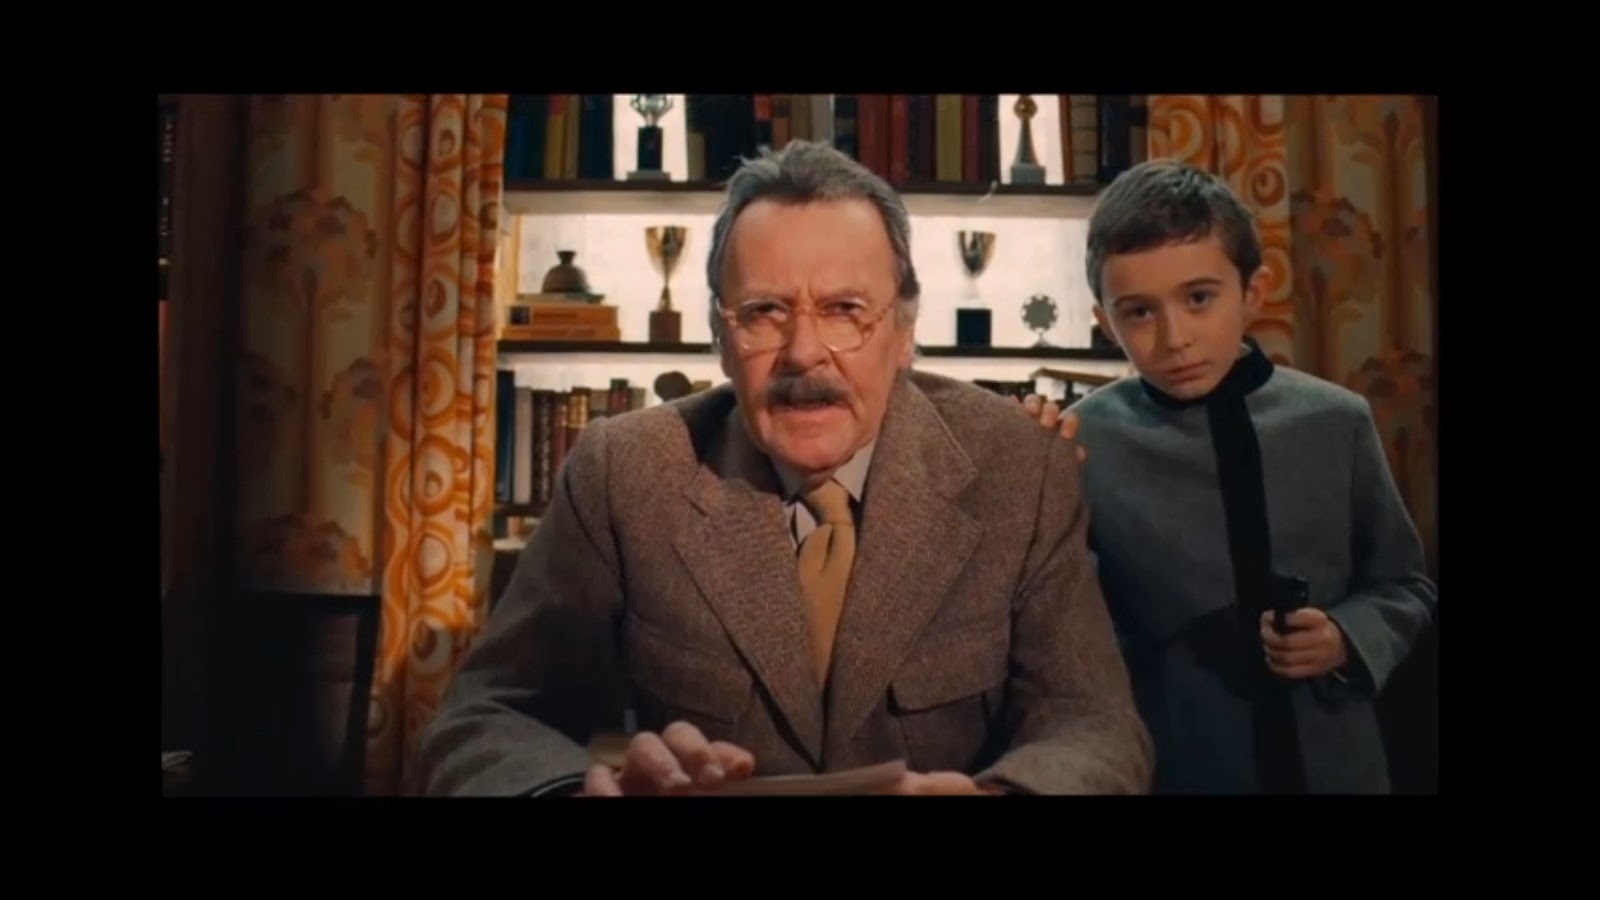 Tom Wilkinson only gets two minutes of screentime in 'The Grand Budapest Hotel,' but his lines speak volumes about Anderson's cinematic allure. (Fox Searchlight)